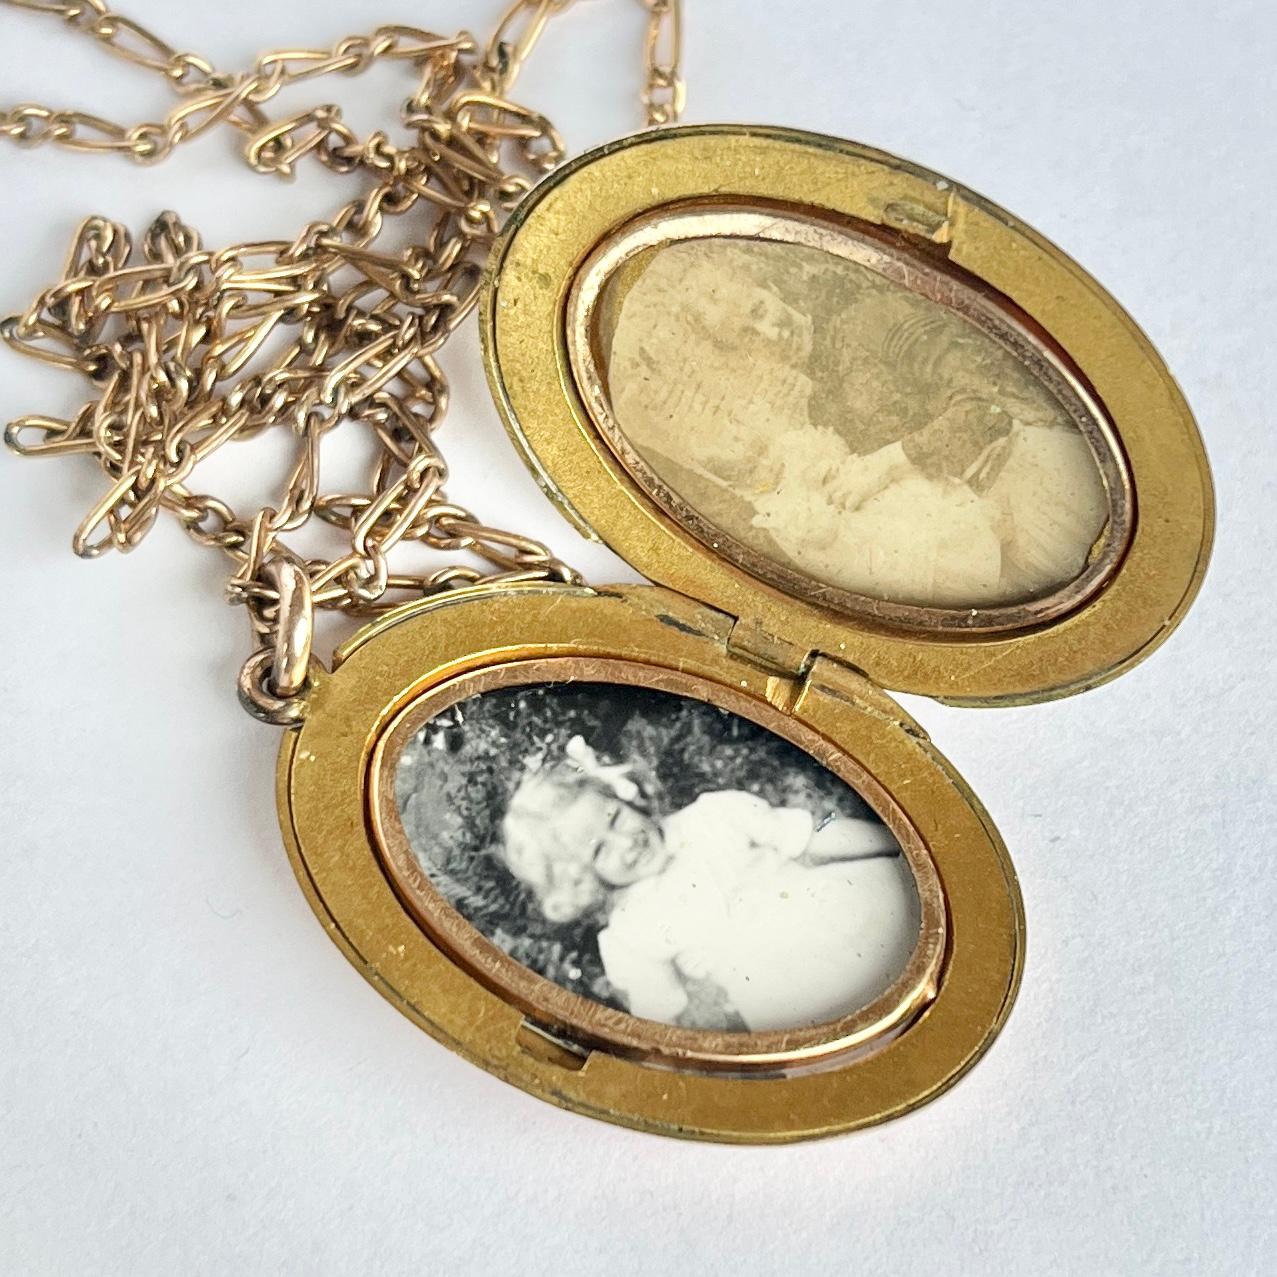 This simple yet beautiful rolled gold locket has two pictures inside. The chain is also rolled gold which means it is coated in a fine layer of gold. Locket still closes securely. 

Locket Dimensions: 32x24mm
Chain Length: 44cm

Weight: 14g